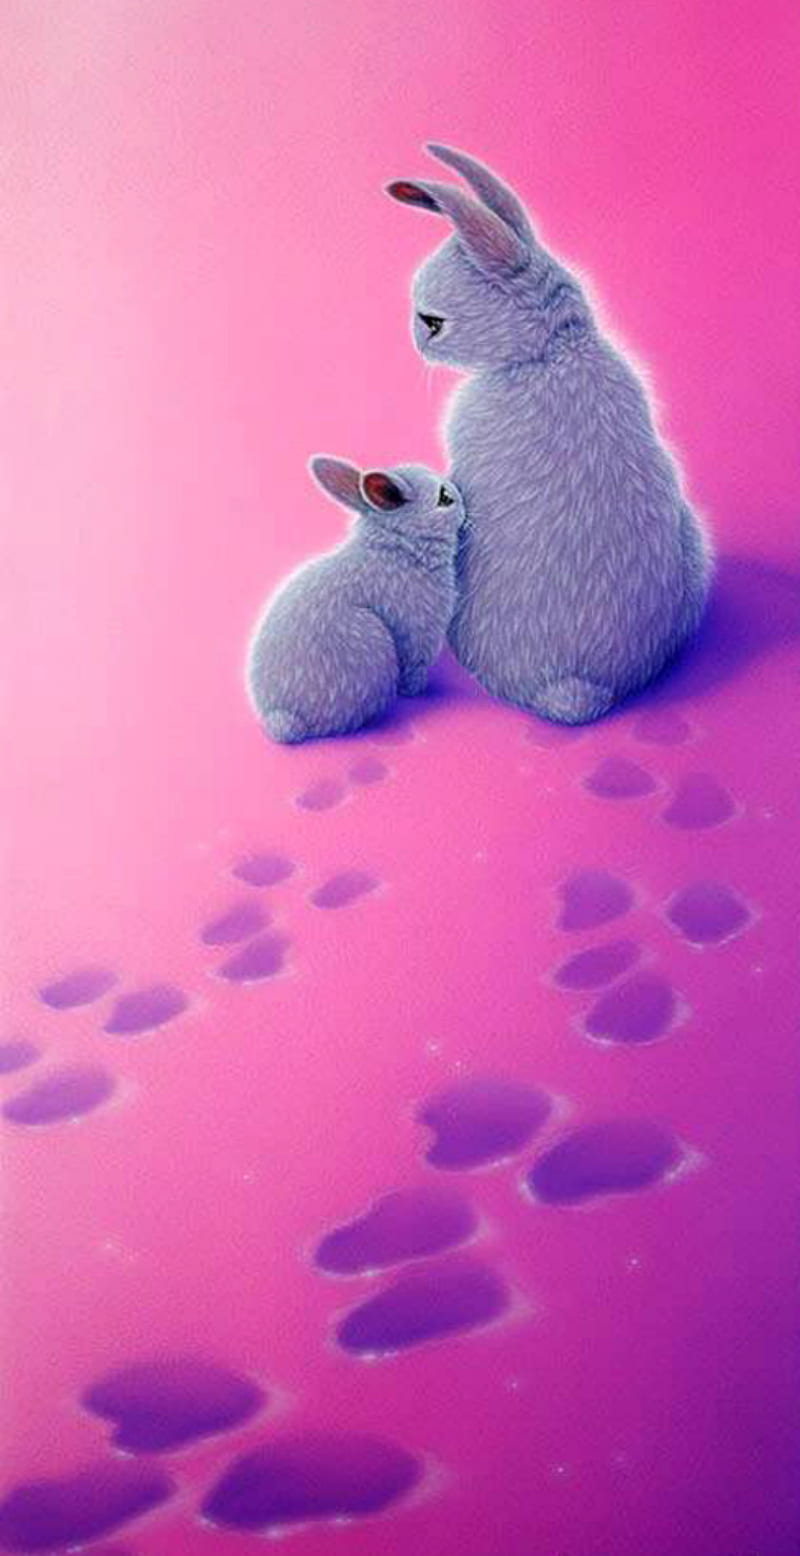 Momma and baby, bunnies, bunny, snow, prints, pink, cute, animals